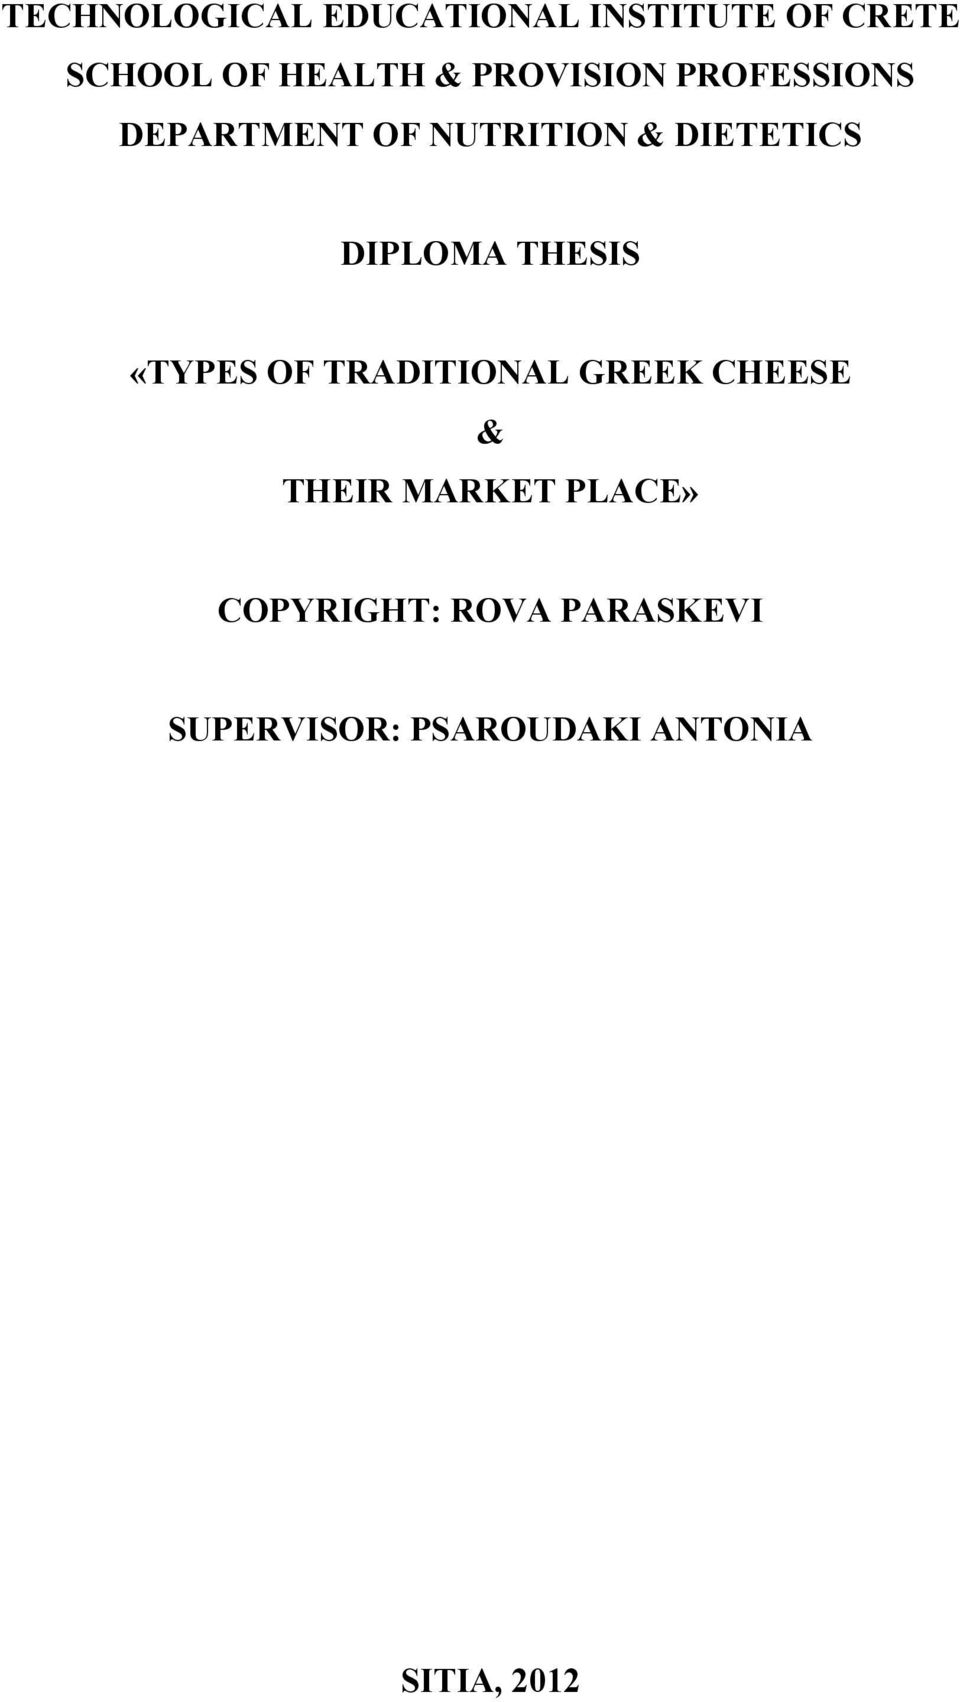 THESIS «TYPES OF TRADITIONAL GREEK CHEESE & THEIR MARKET PLACE»